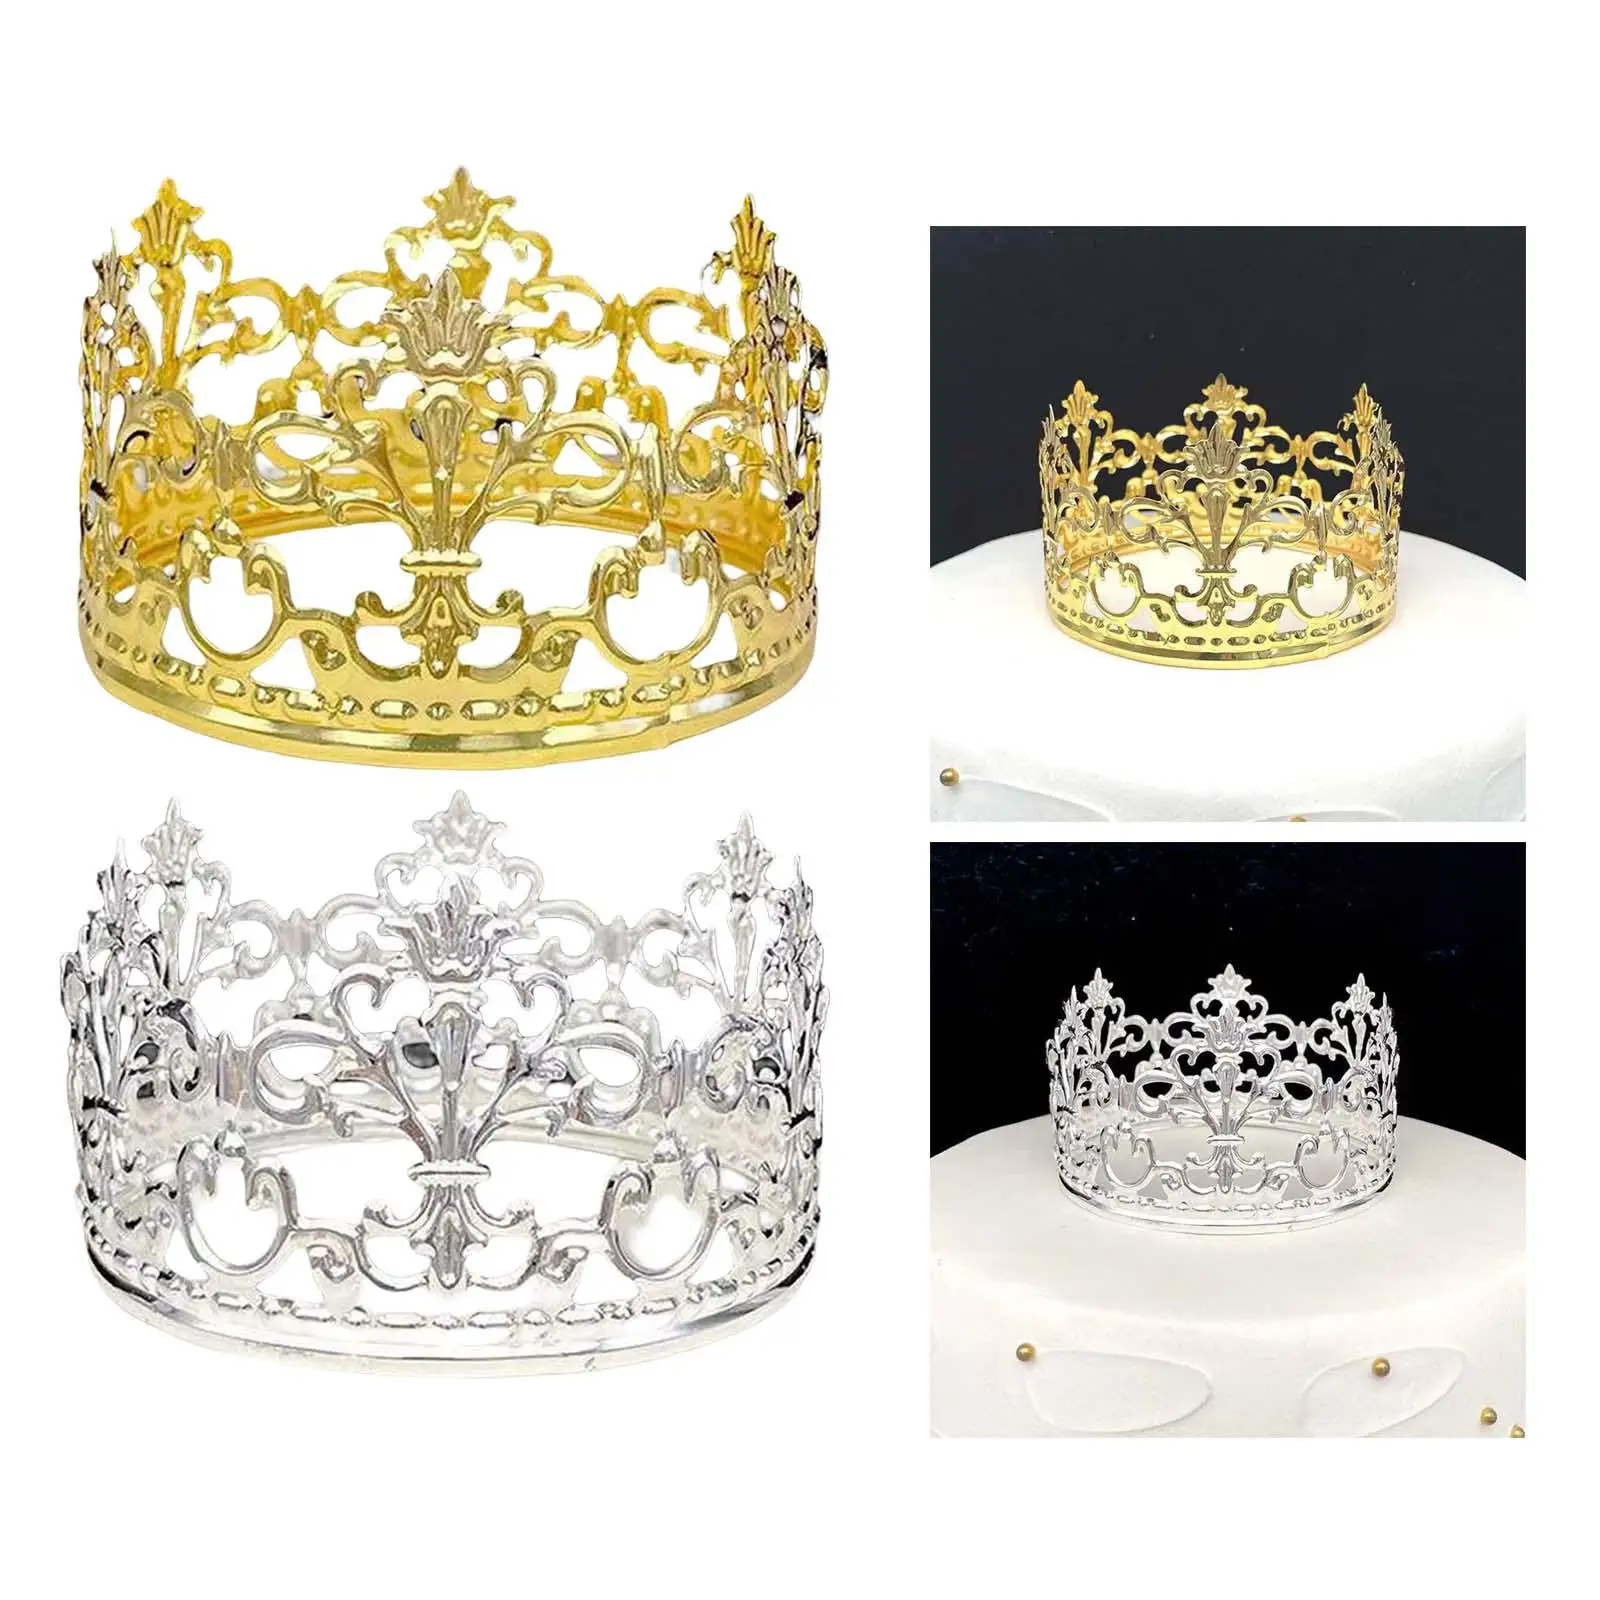 Crown Cake Topper Cake Decorations Vintage Style Iron Headpieces Queen Crown Headband for Women Photography Props Birthday Party